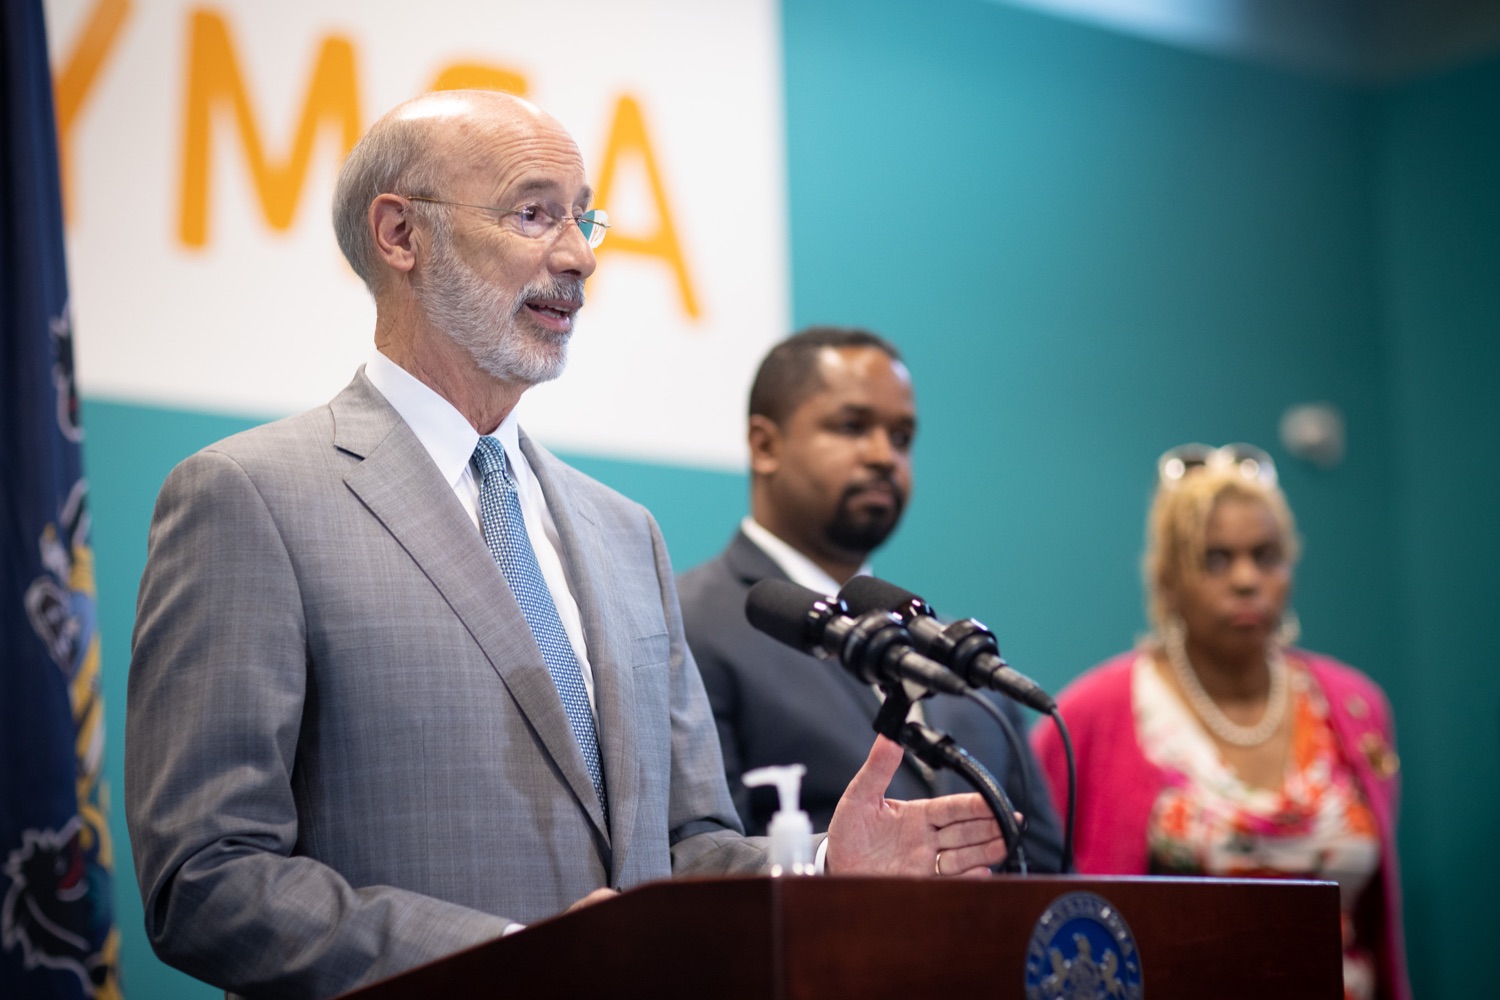 Pennsylvania Governor Tom Wolf speaking with the press.  With some politicians spreading lies about our elections to divide us, Governor Tom Wolf today vowed to protect the freedom to vote and oppose legislation that would create barriers to voting and silence the voices of some Pennsylvanians. These are the same lies that led directly to the appalling assault on our U.S. Capitol and our democracy on January 6, and now, just a few short months later, the same people who fomented, encouraged, and joined that mob are again emerging to undermine the fabric of our nation.   Harrisburg, PA  June 9, 2021<br><a href="https://filesource.amperwave.net/commonwealthofpa/photo/18815_gov_voterRights_dz_017.jpg" target="_blank">⇣ Download Photo</a>